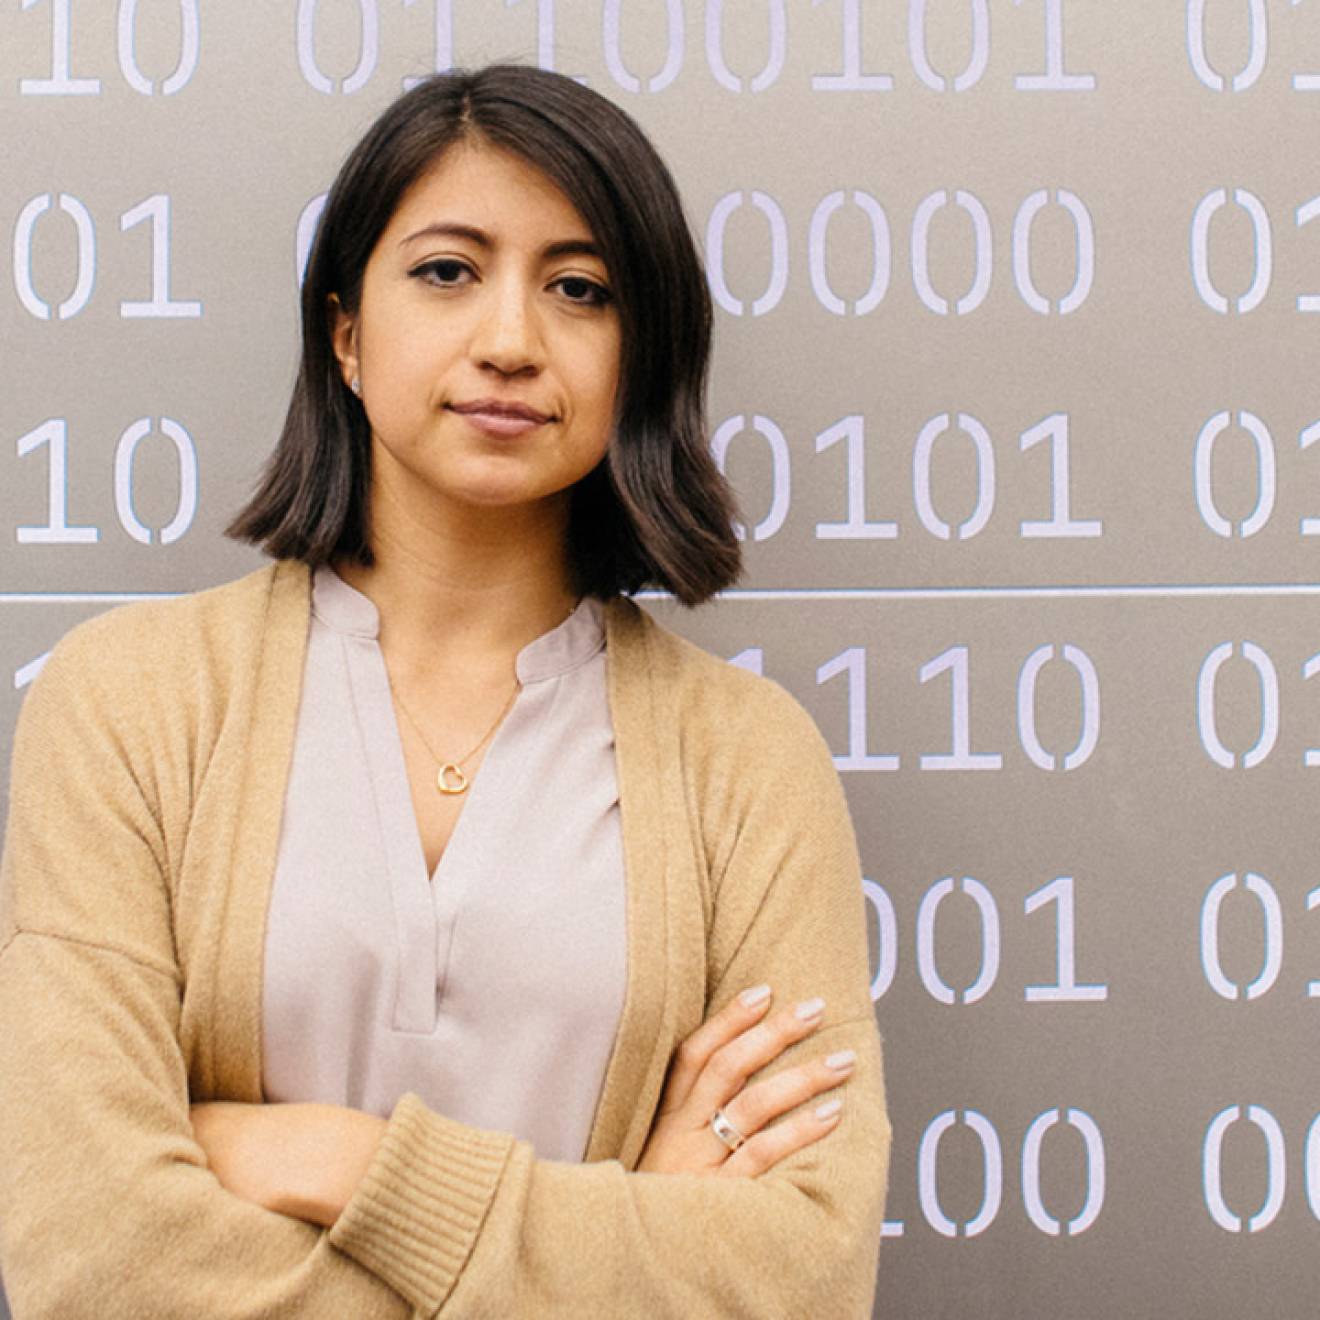 A woman with shoulder length dark hair wearing a cream colored cardigan looks resolutely at the camera with her arms crossed. She's standing in front of a metal panel with sequences of 0s and 1s cut out to simulate computer code. 